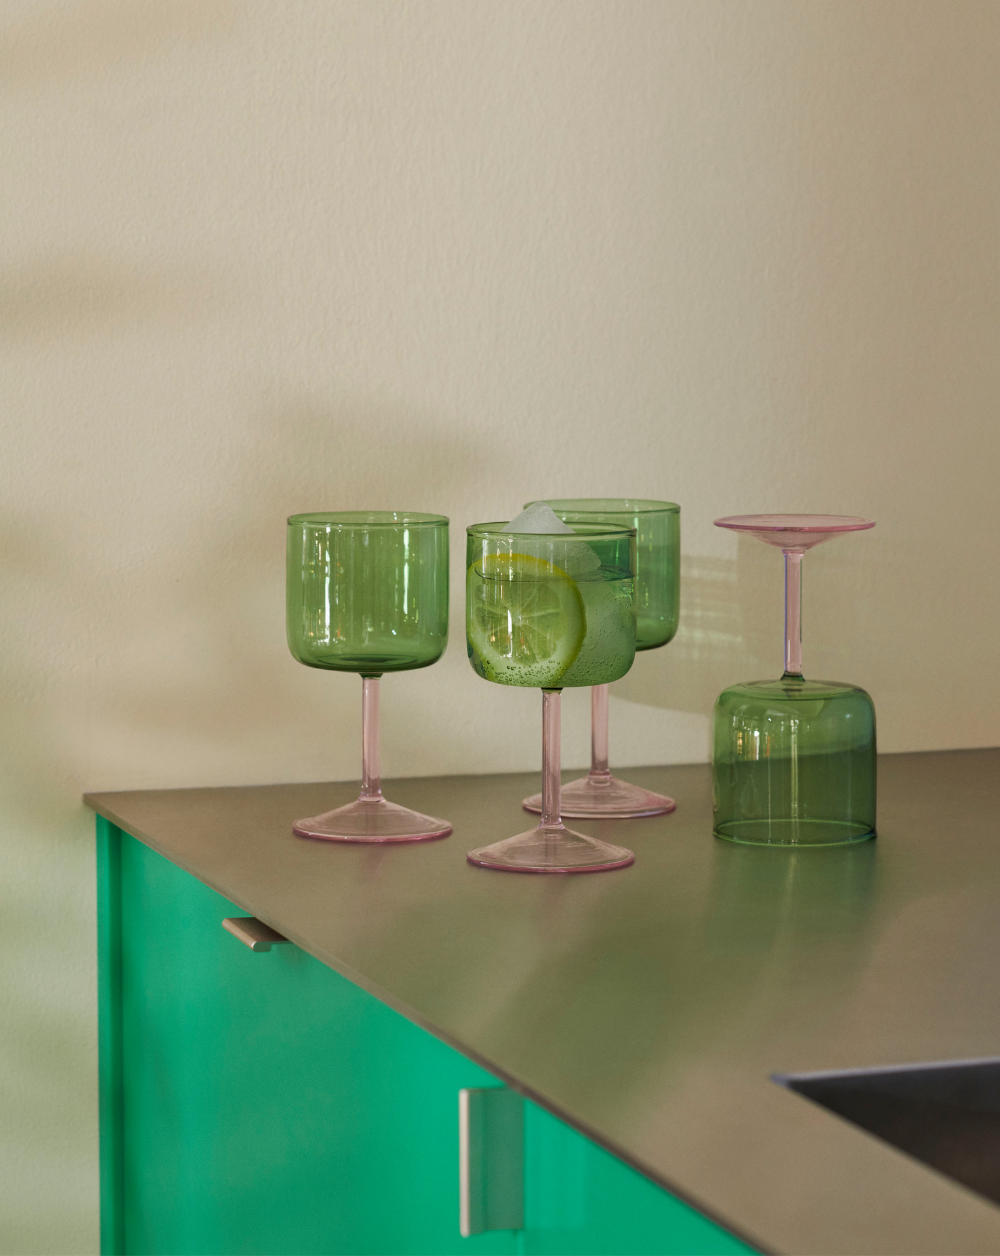 Tint Wine Glasses - Set of 2 (Color: Green & Pink)